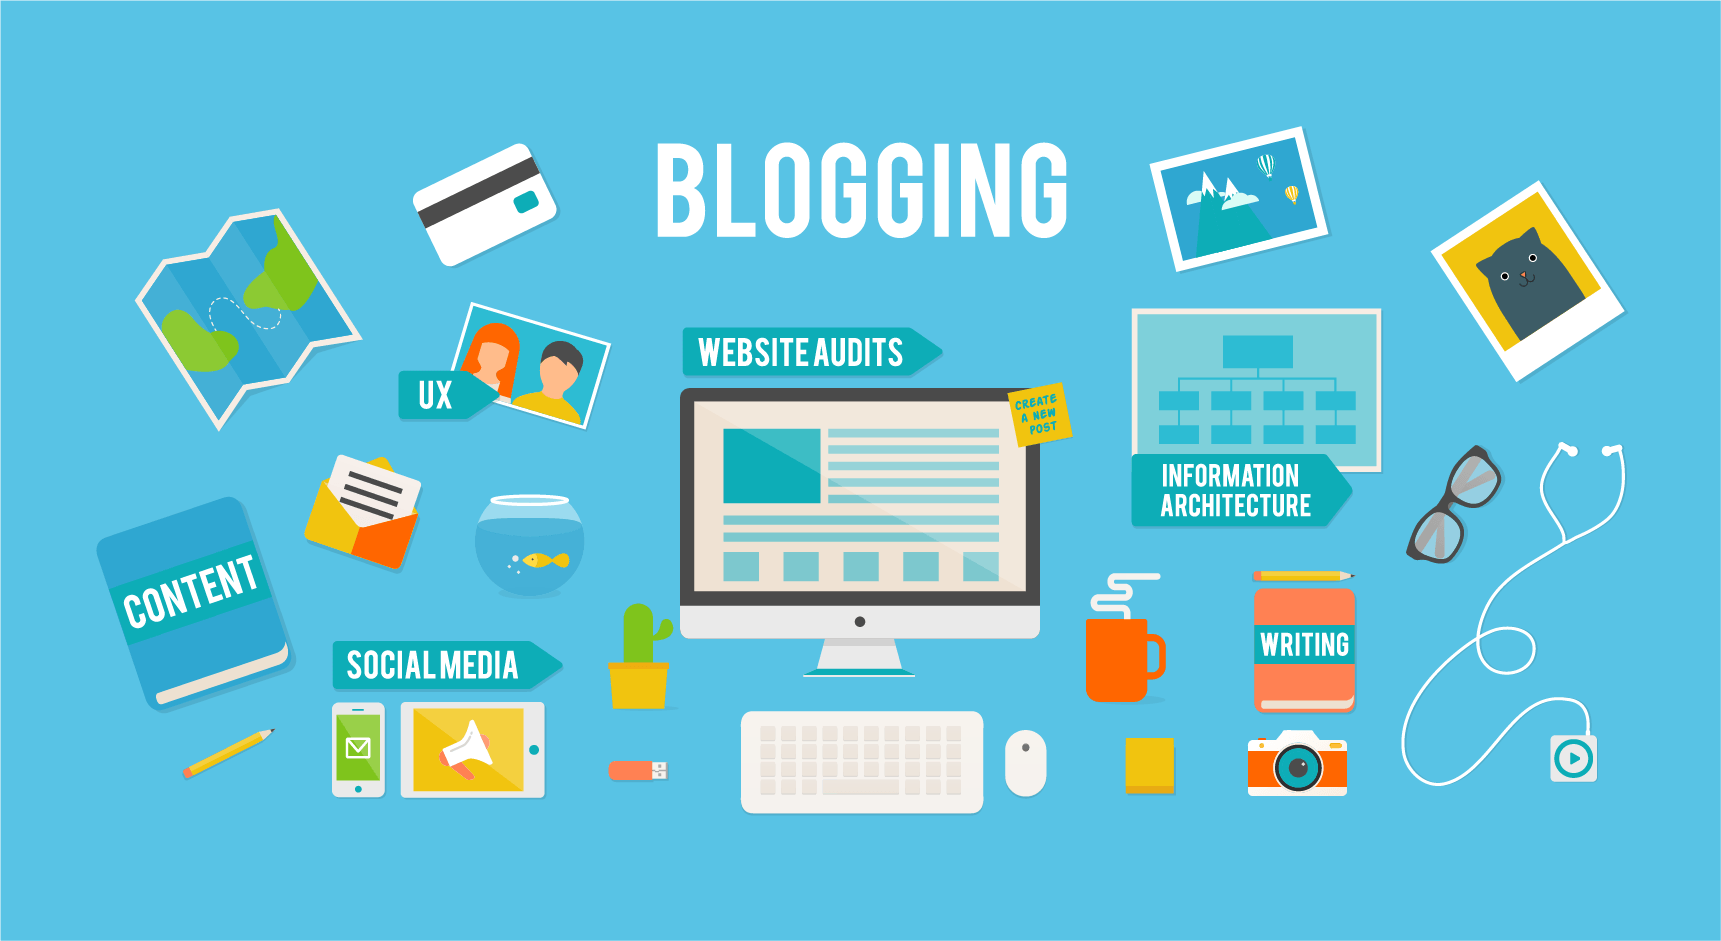 A Guide Of Making Your Personal Blog - Part 2